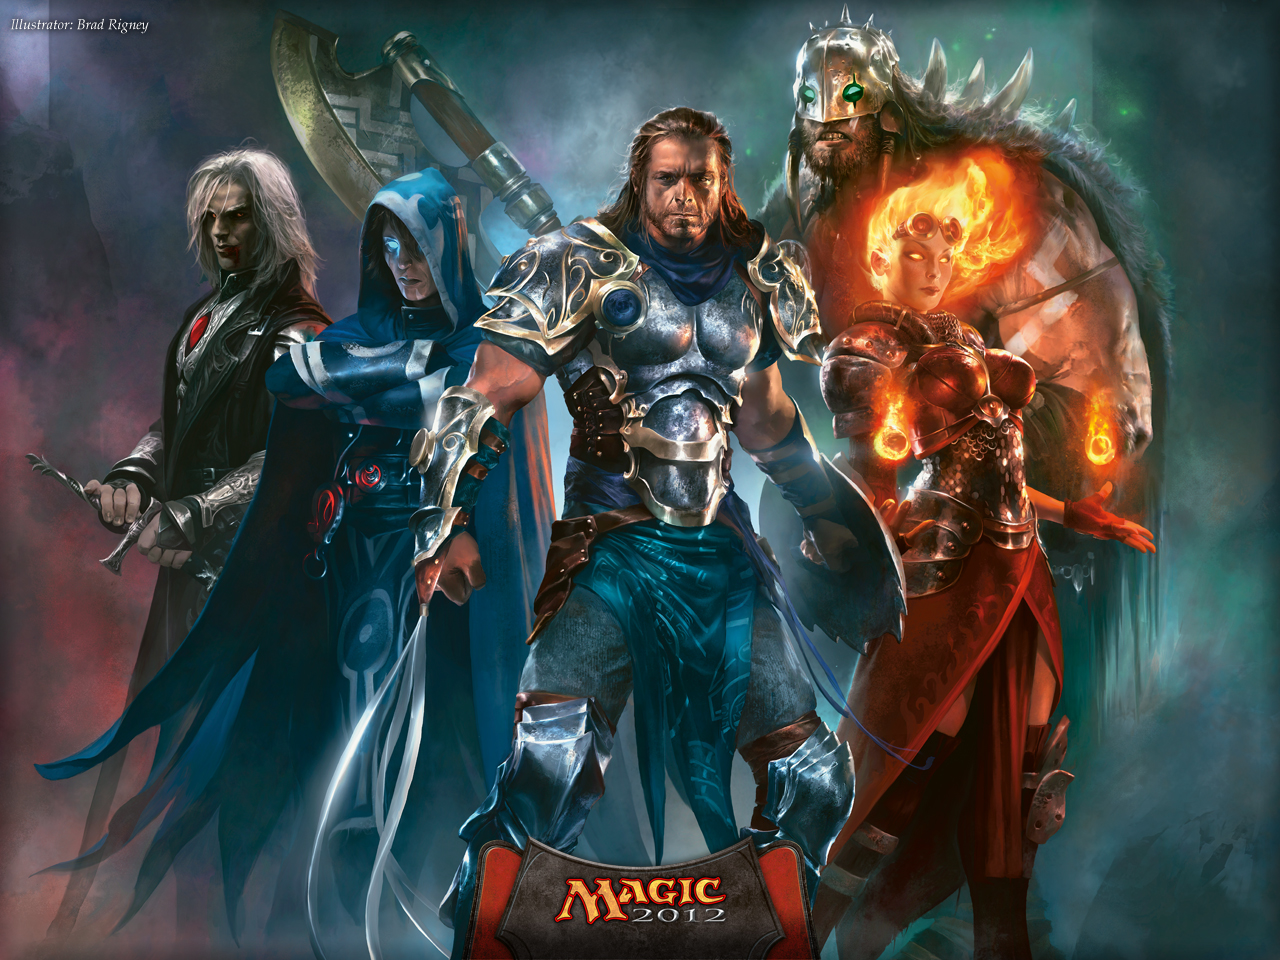 http://media.wizards.com/images/magic/daily/wallpapers/wp_2012planeswalkers_1280x960.jpg